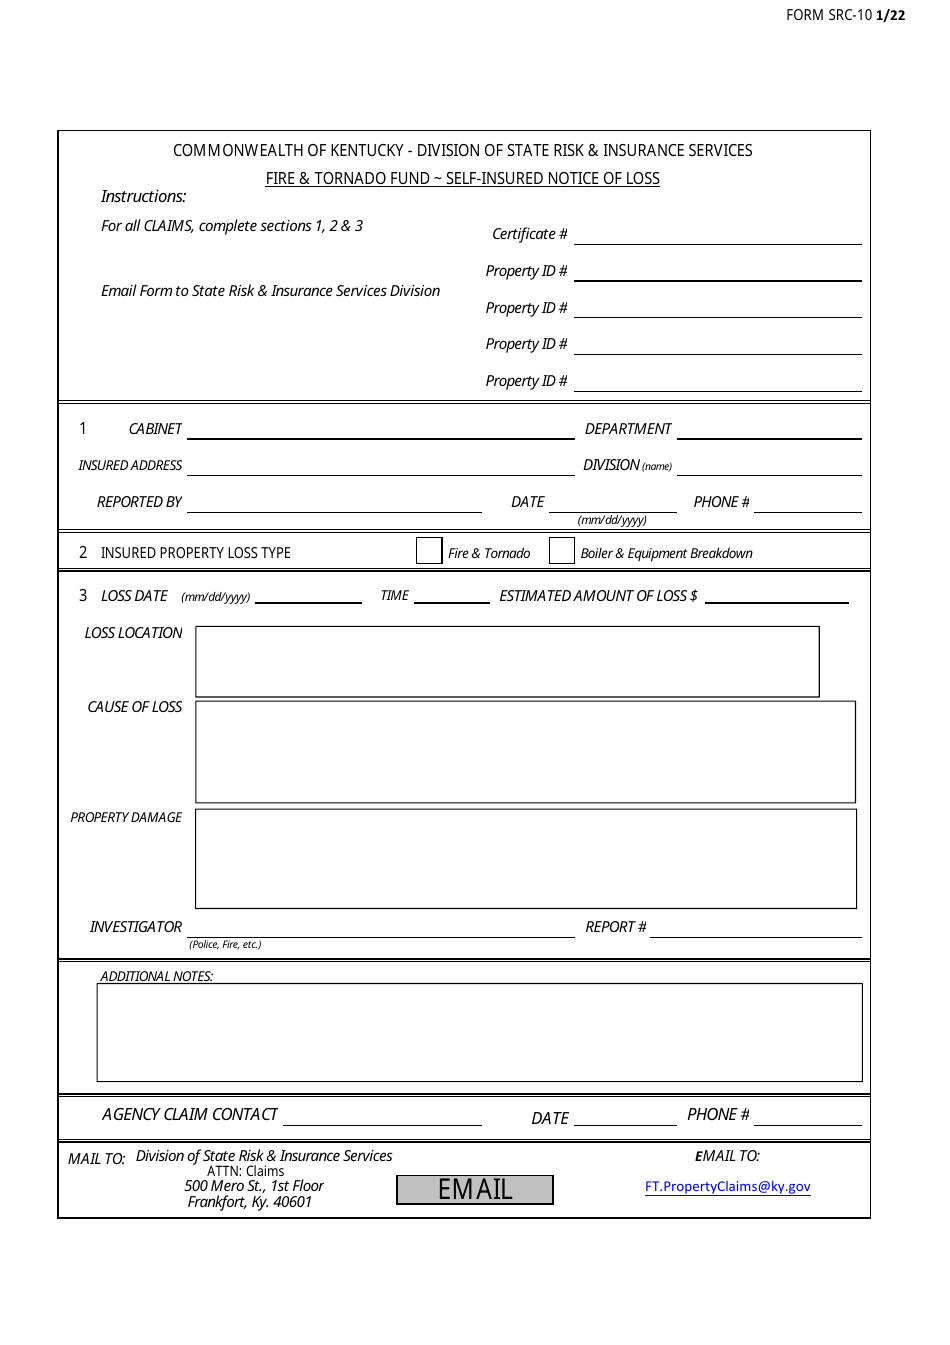 Form SRC-10 Fire  Tornado Fund - Self-insured Notice of Loss - Kentucky, Page 1